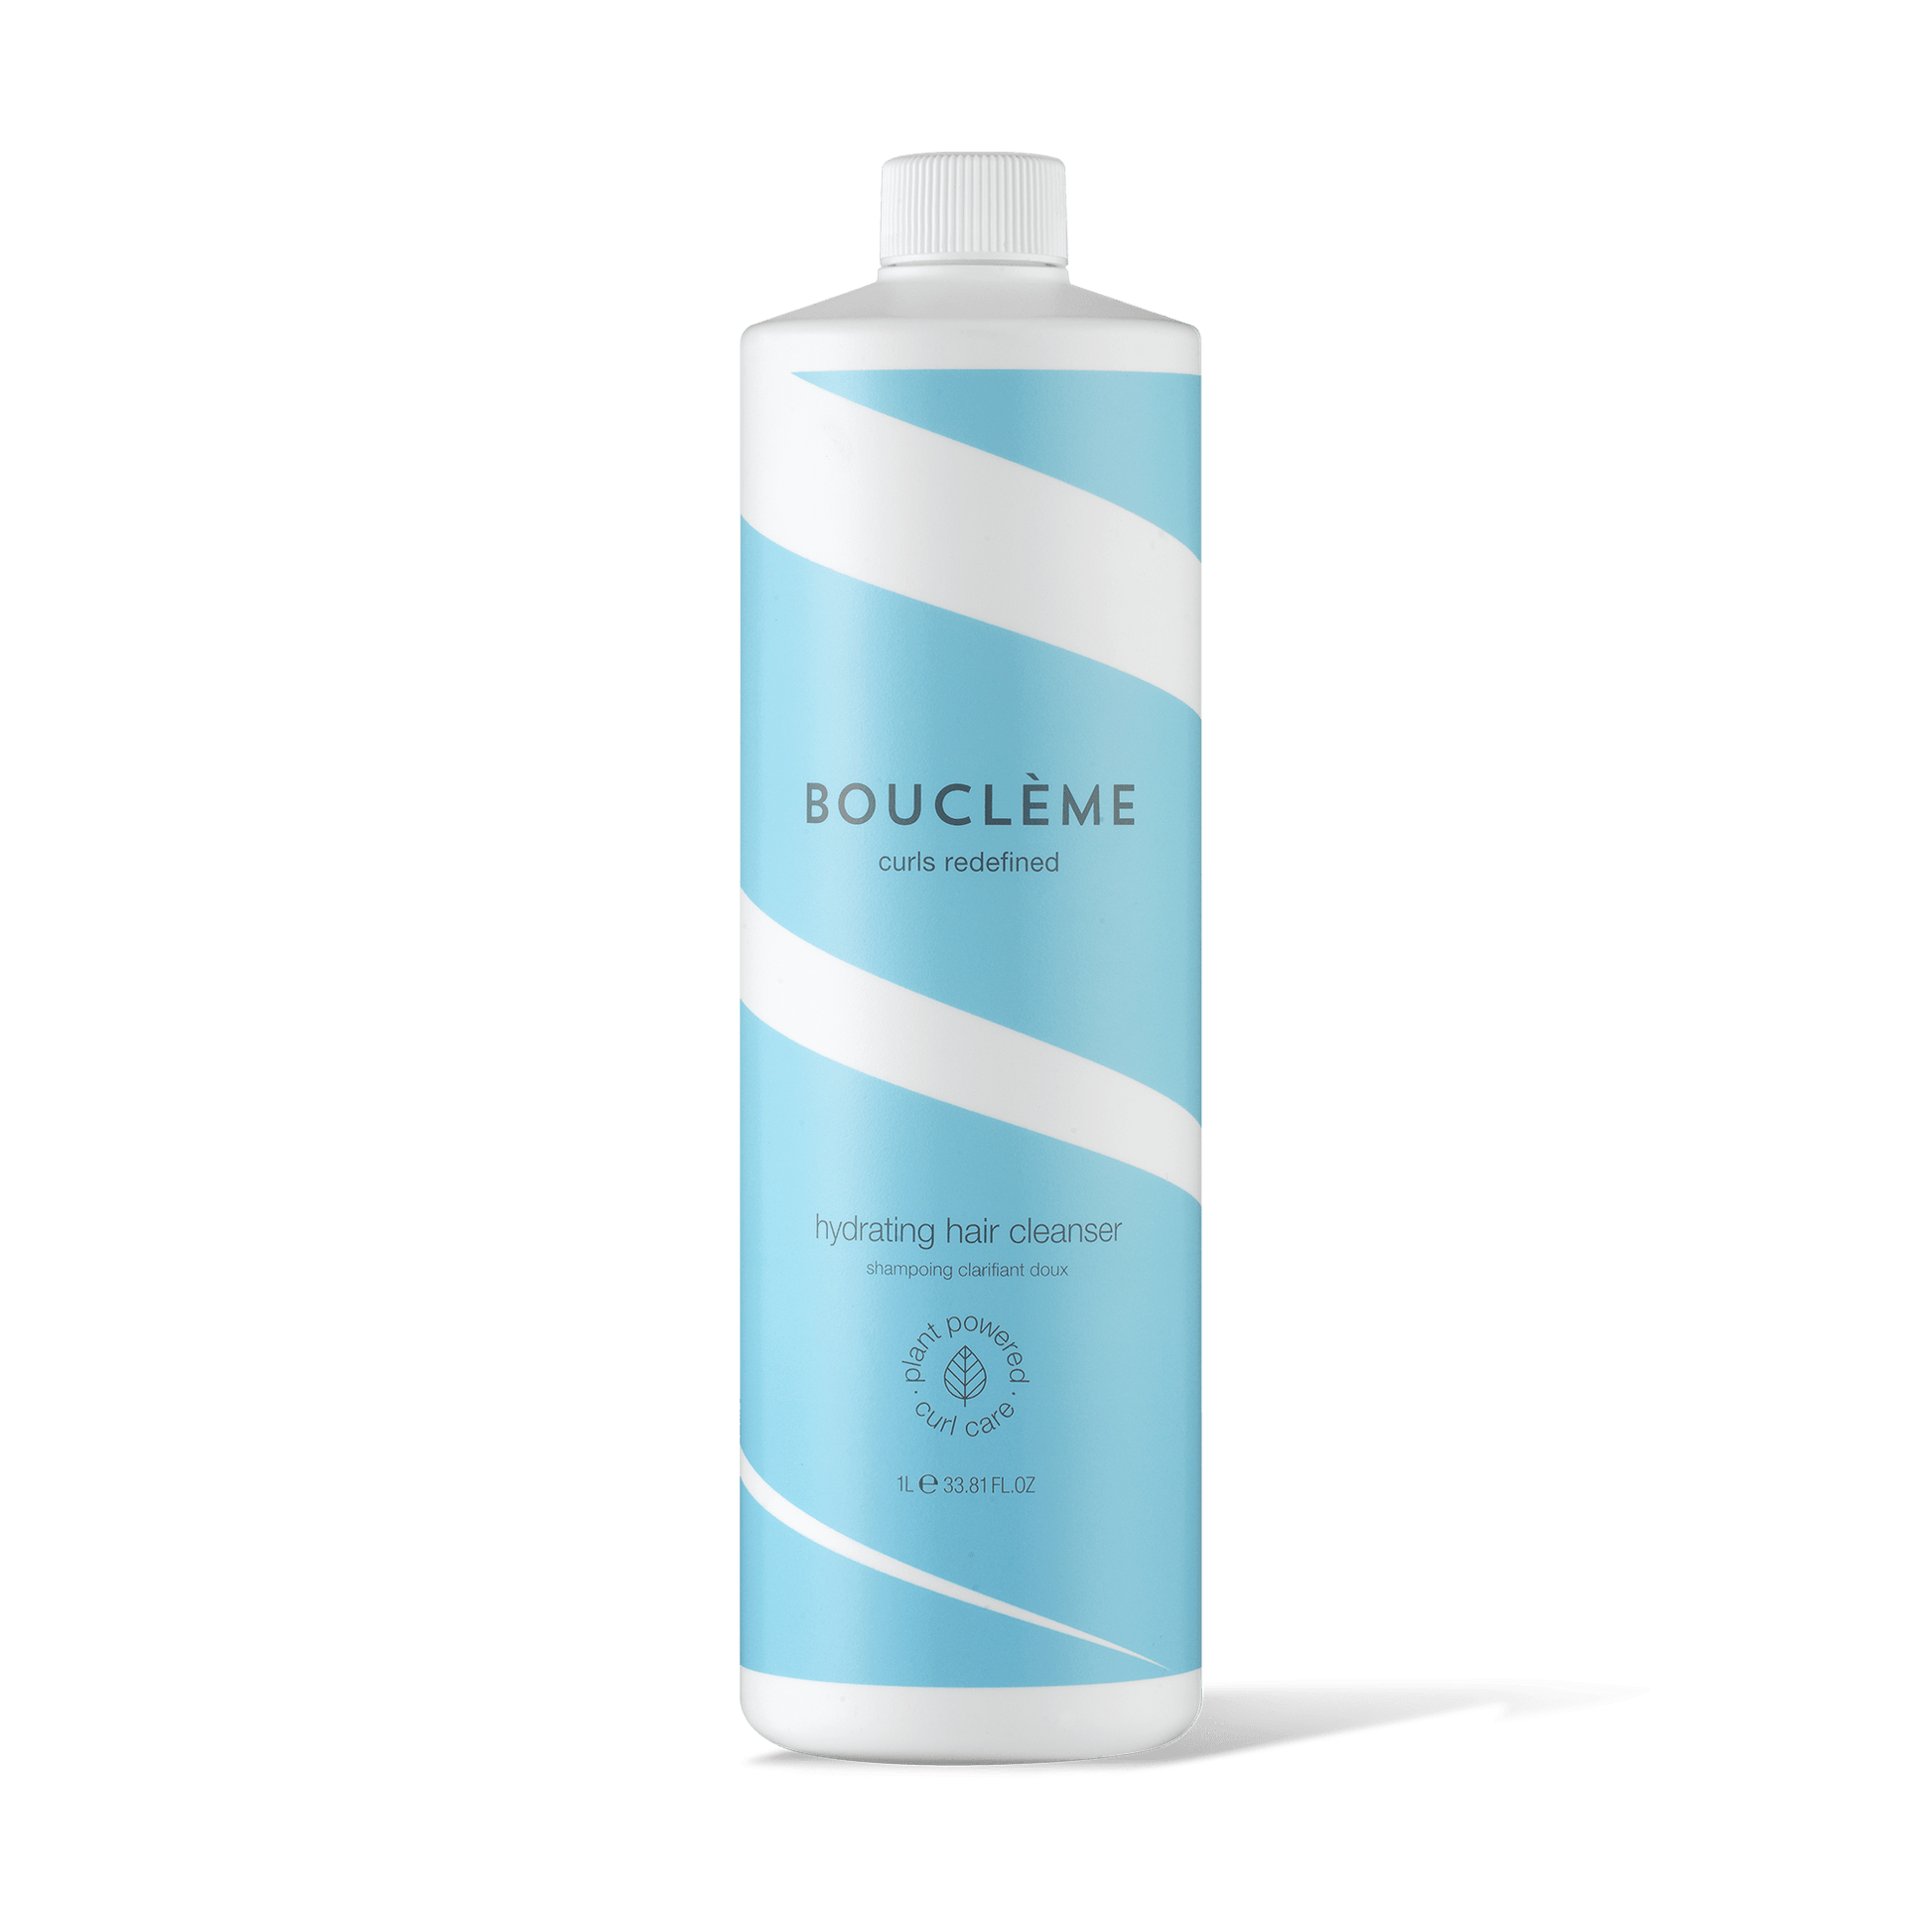 Low foaming, curl defining, sulphate-free shampoo ideal for fine, wavy hair and oily scalps.